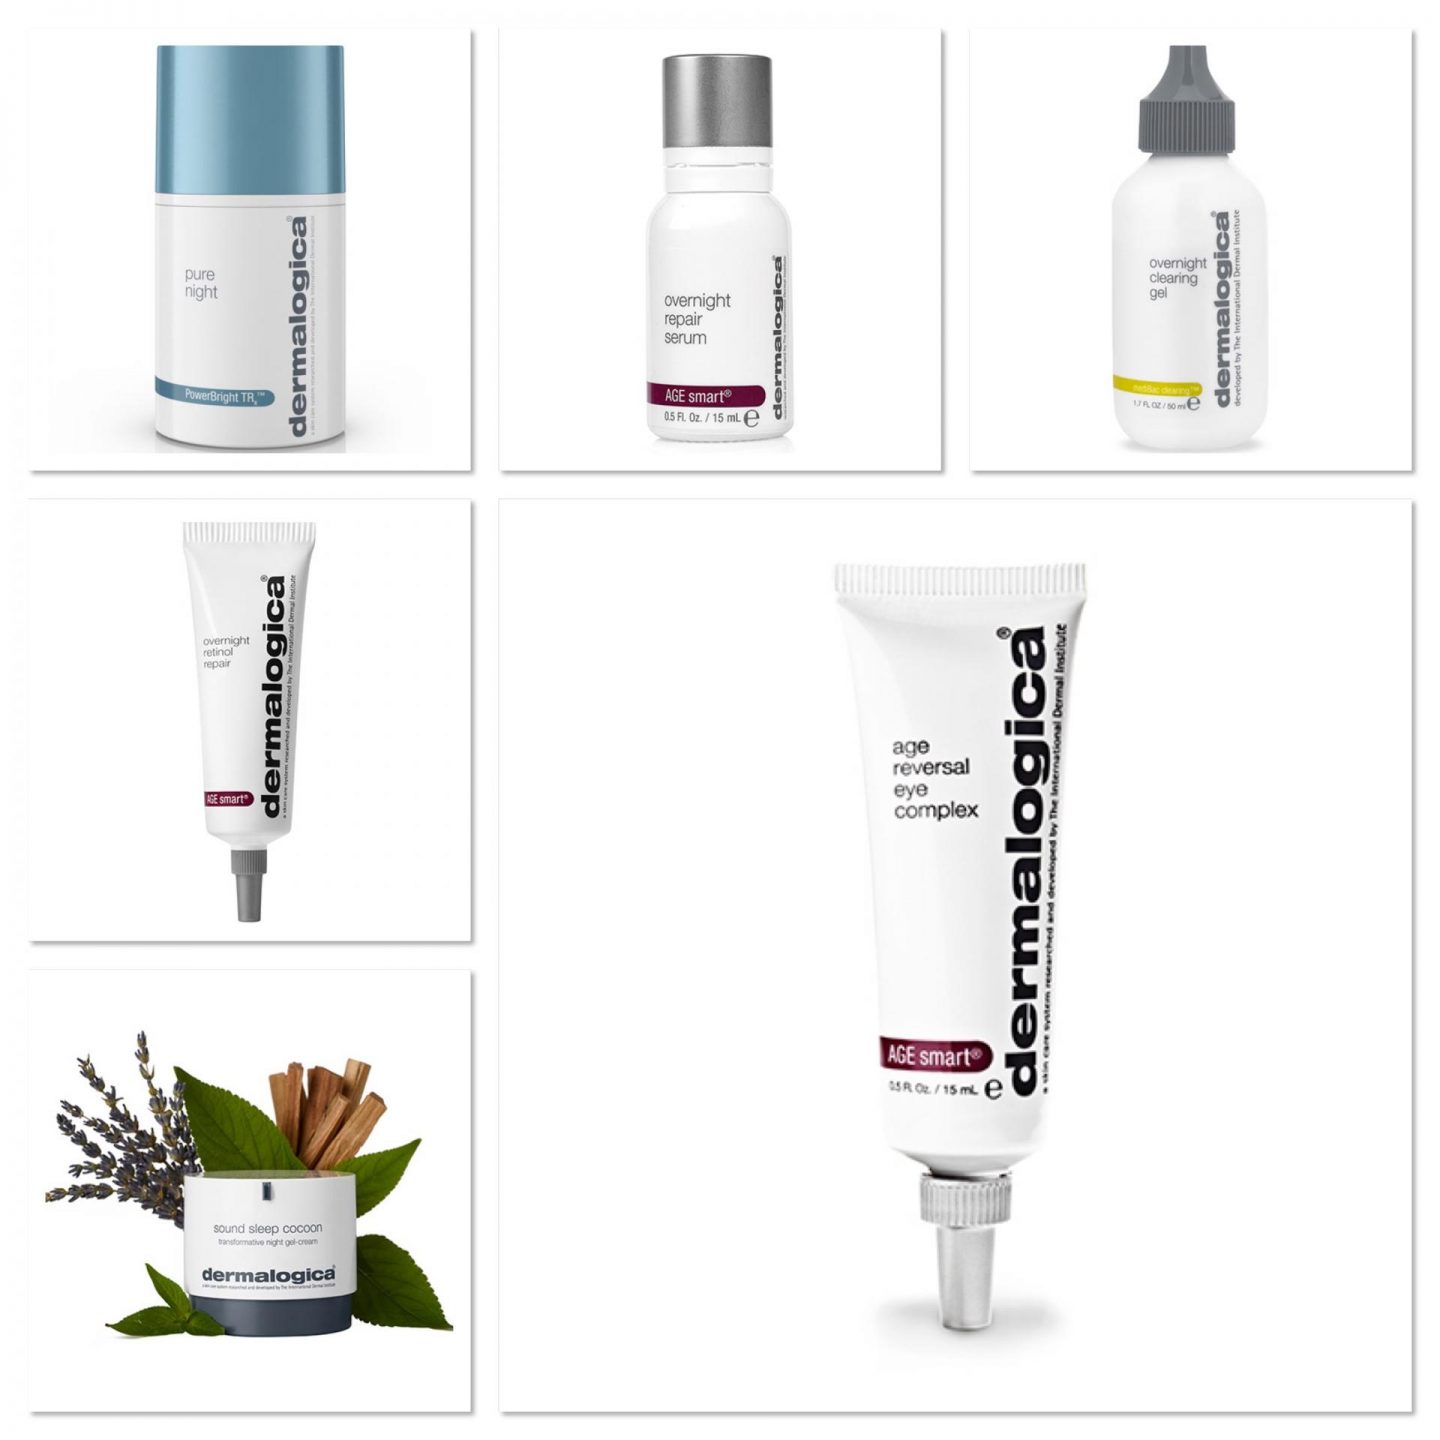 Dermalogica’s Night Time Treatments